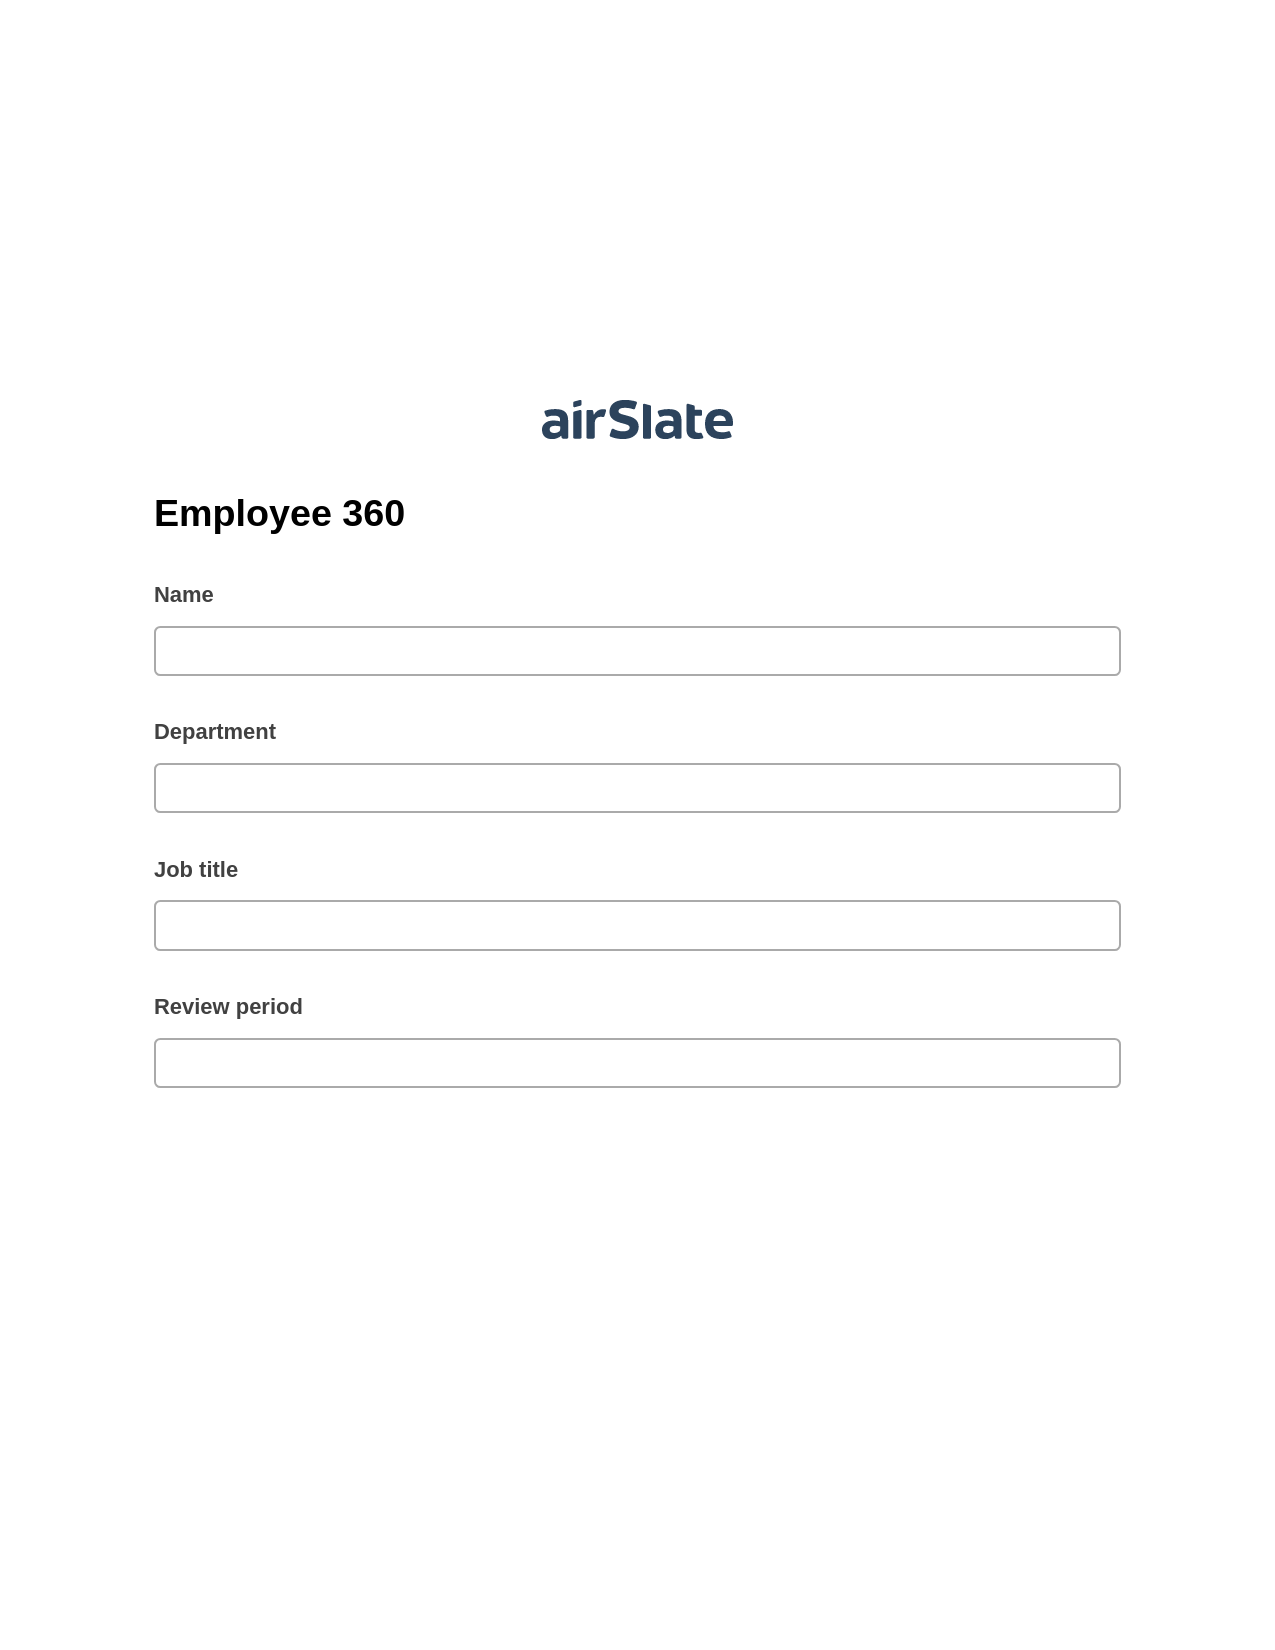 Employee 360 Pre-fill from Salesforce Records Bot, Update MS Dynamics 365 Record Bot, Export to Google Sheet Bot